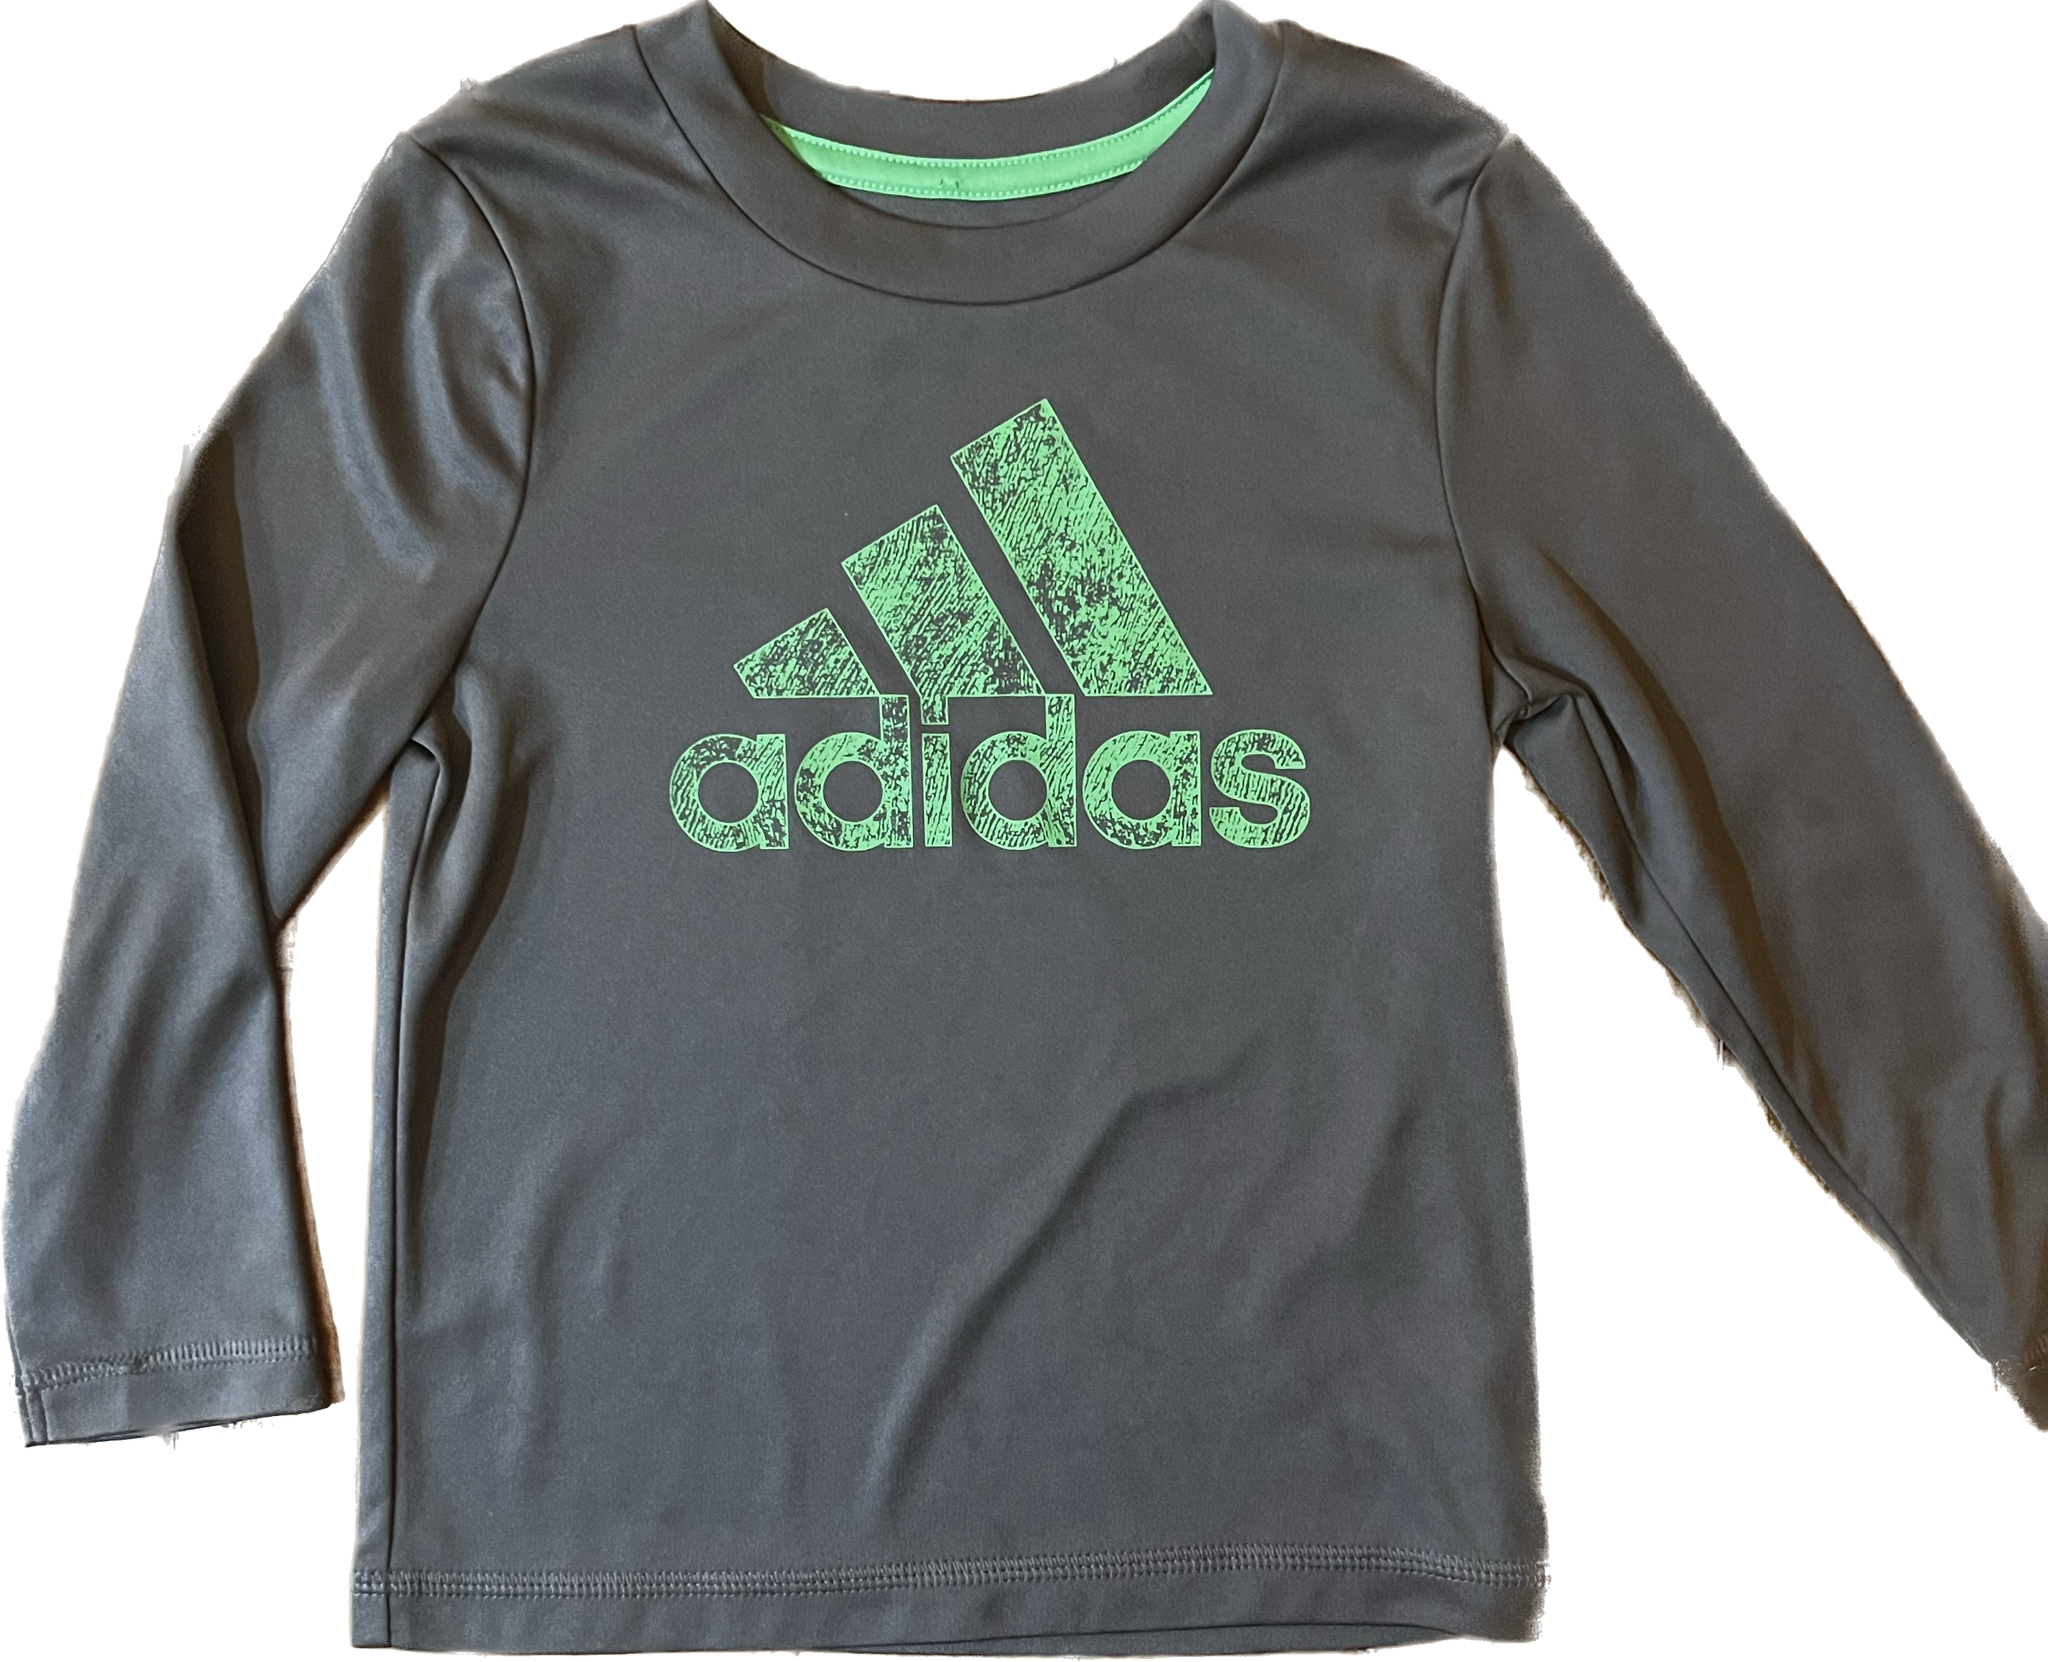 Toddler 2T Adidas Athletic Top